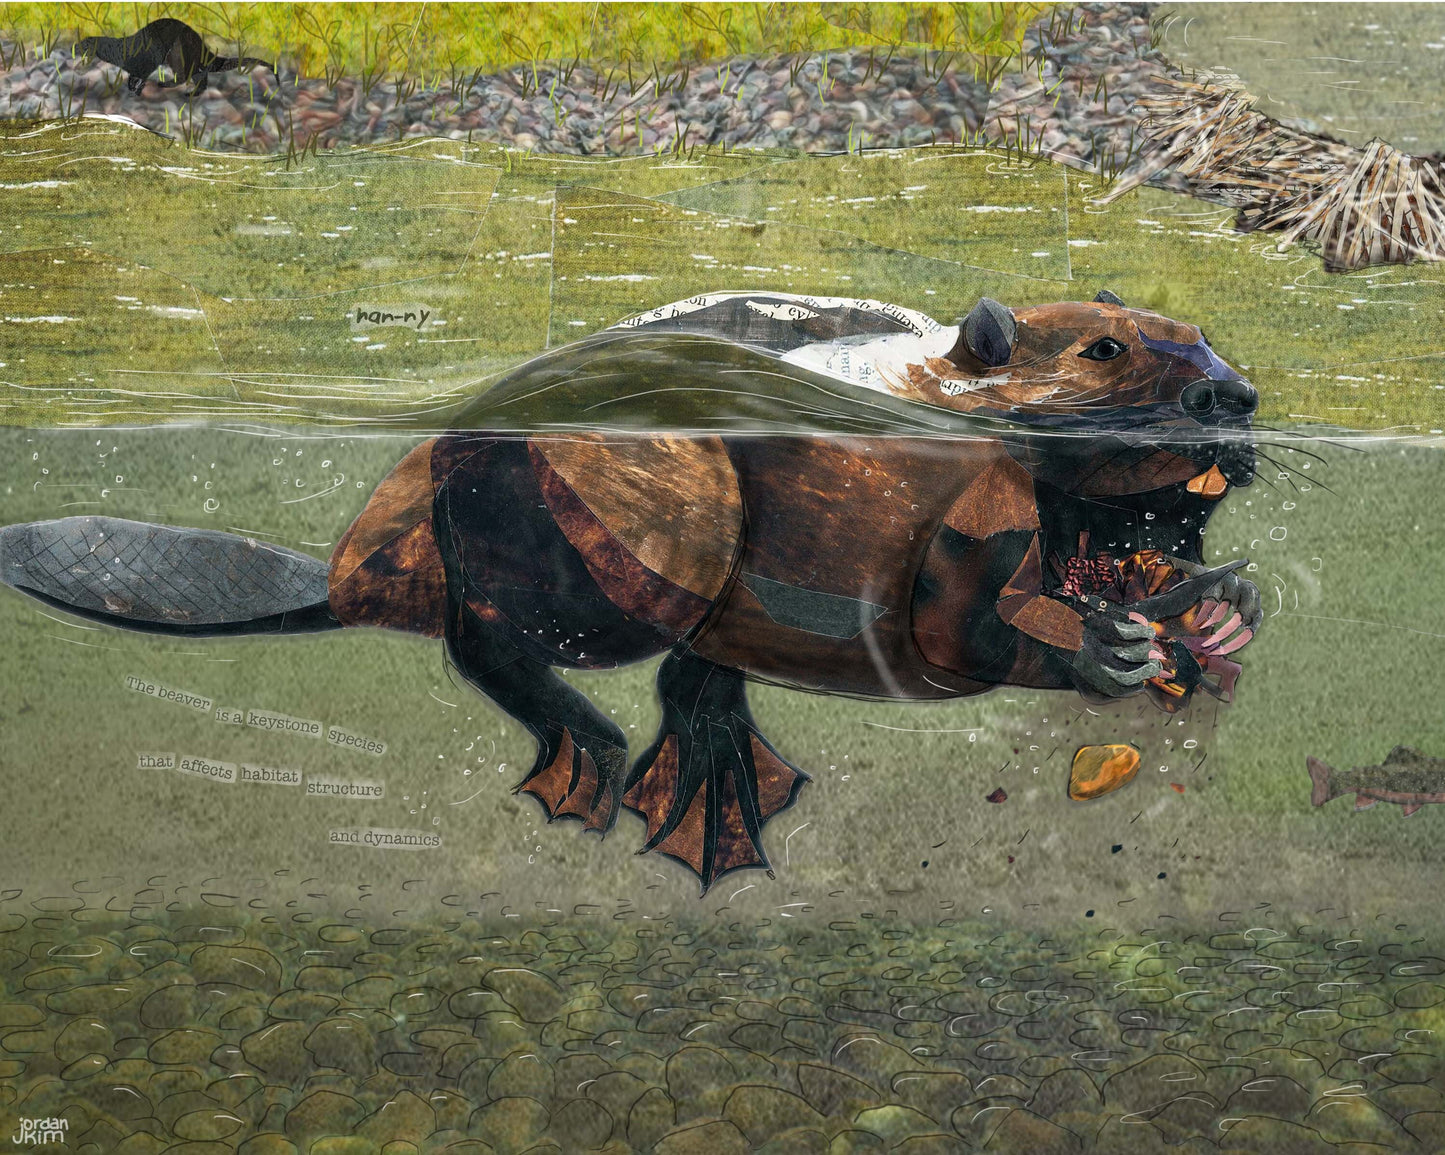 8x10 Art Print of a mixed media collage of a beaver swimming, Yellowstone